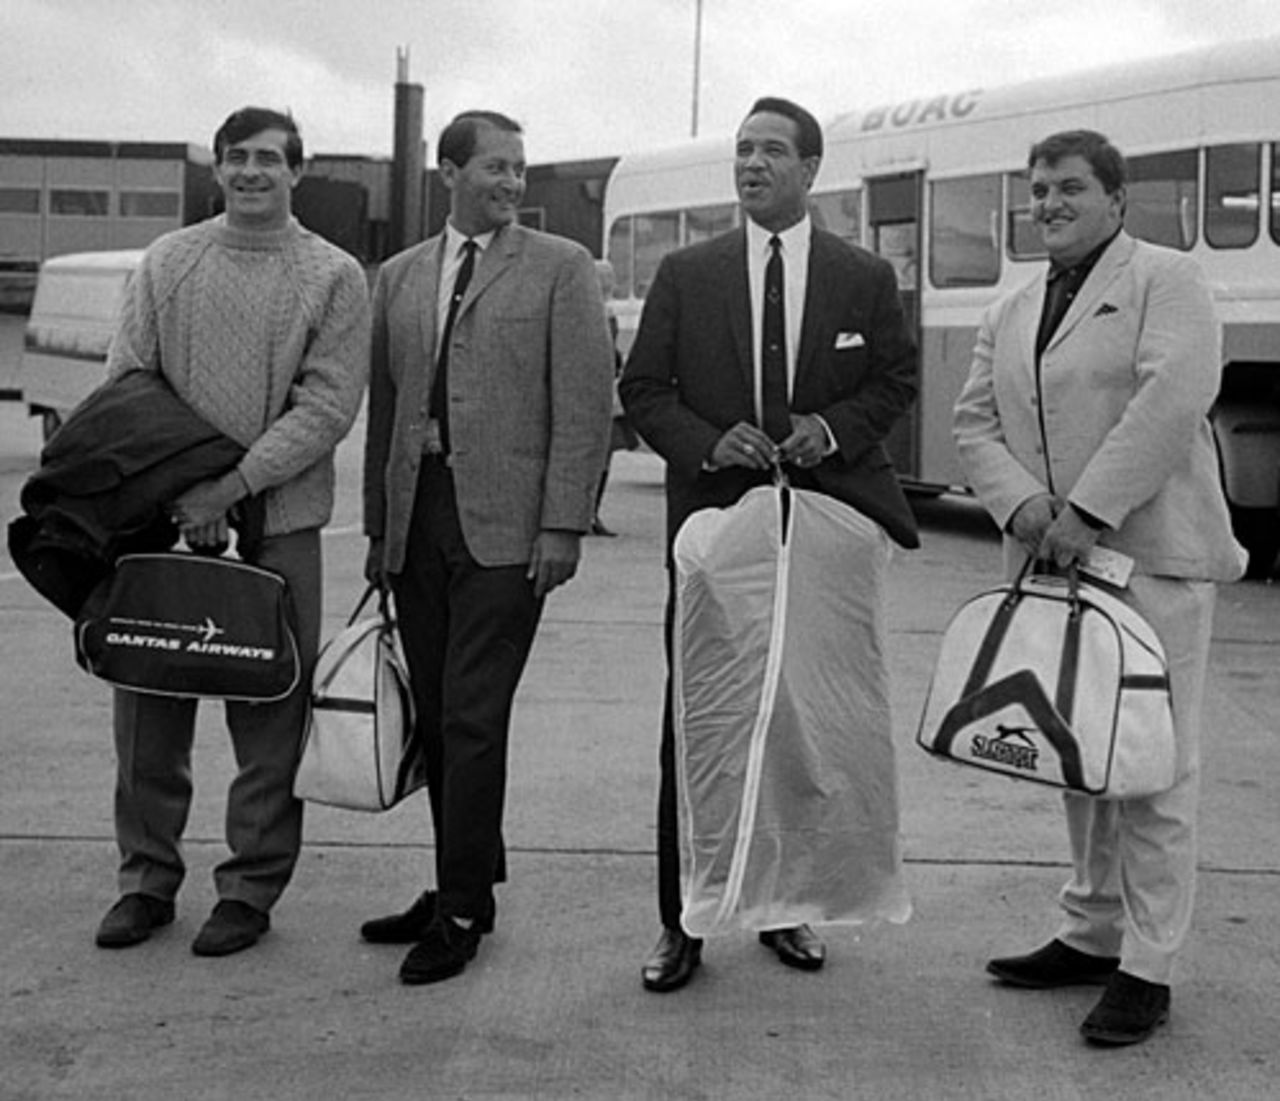 Fred Trueman, Basil D'Oliveira, Garry Sobers and Colin Milburn at Heathrow as they leave to take part in the Doubles Wicket contest in Australia, London, September 27, 1968